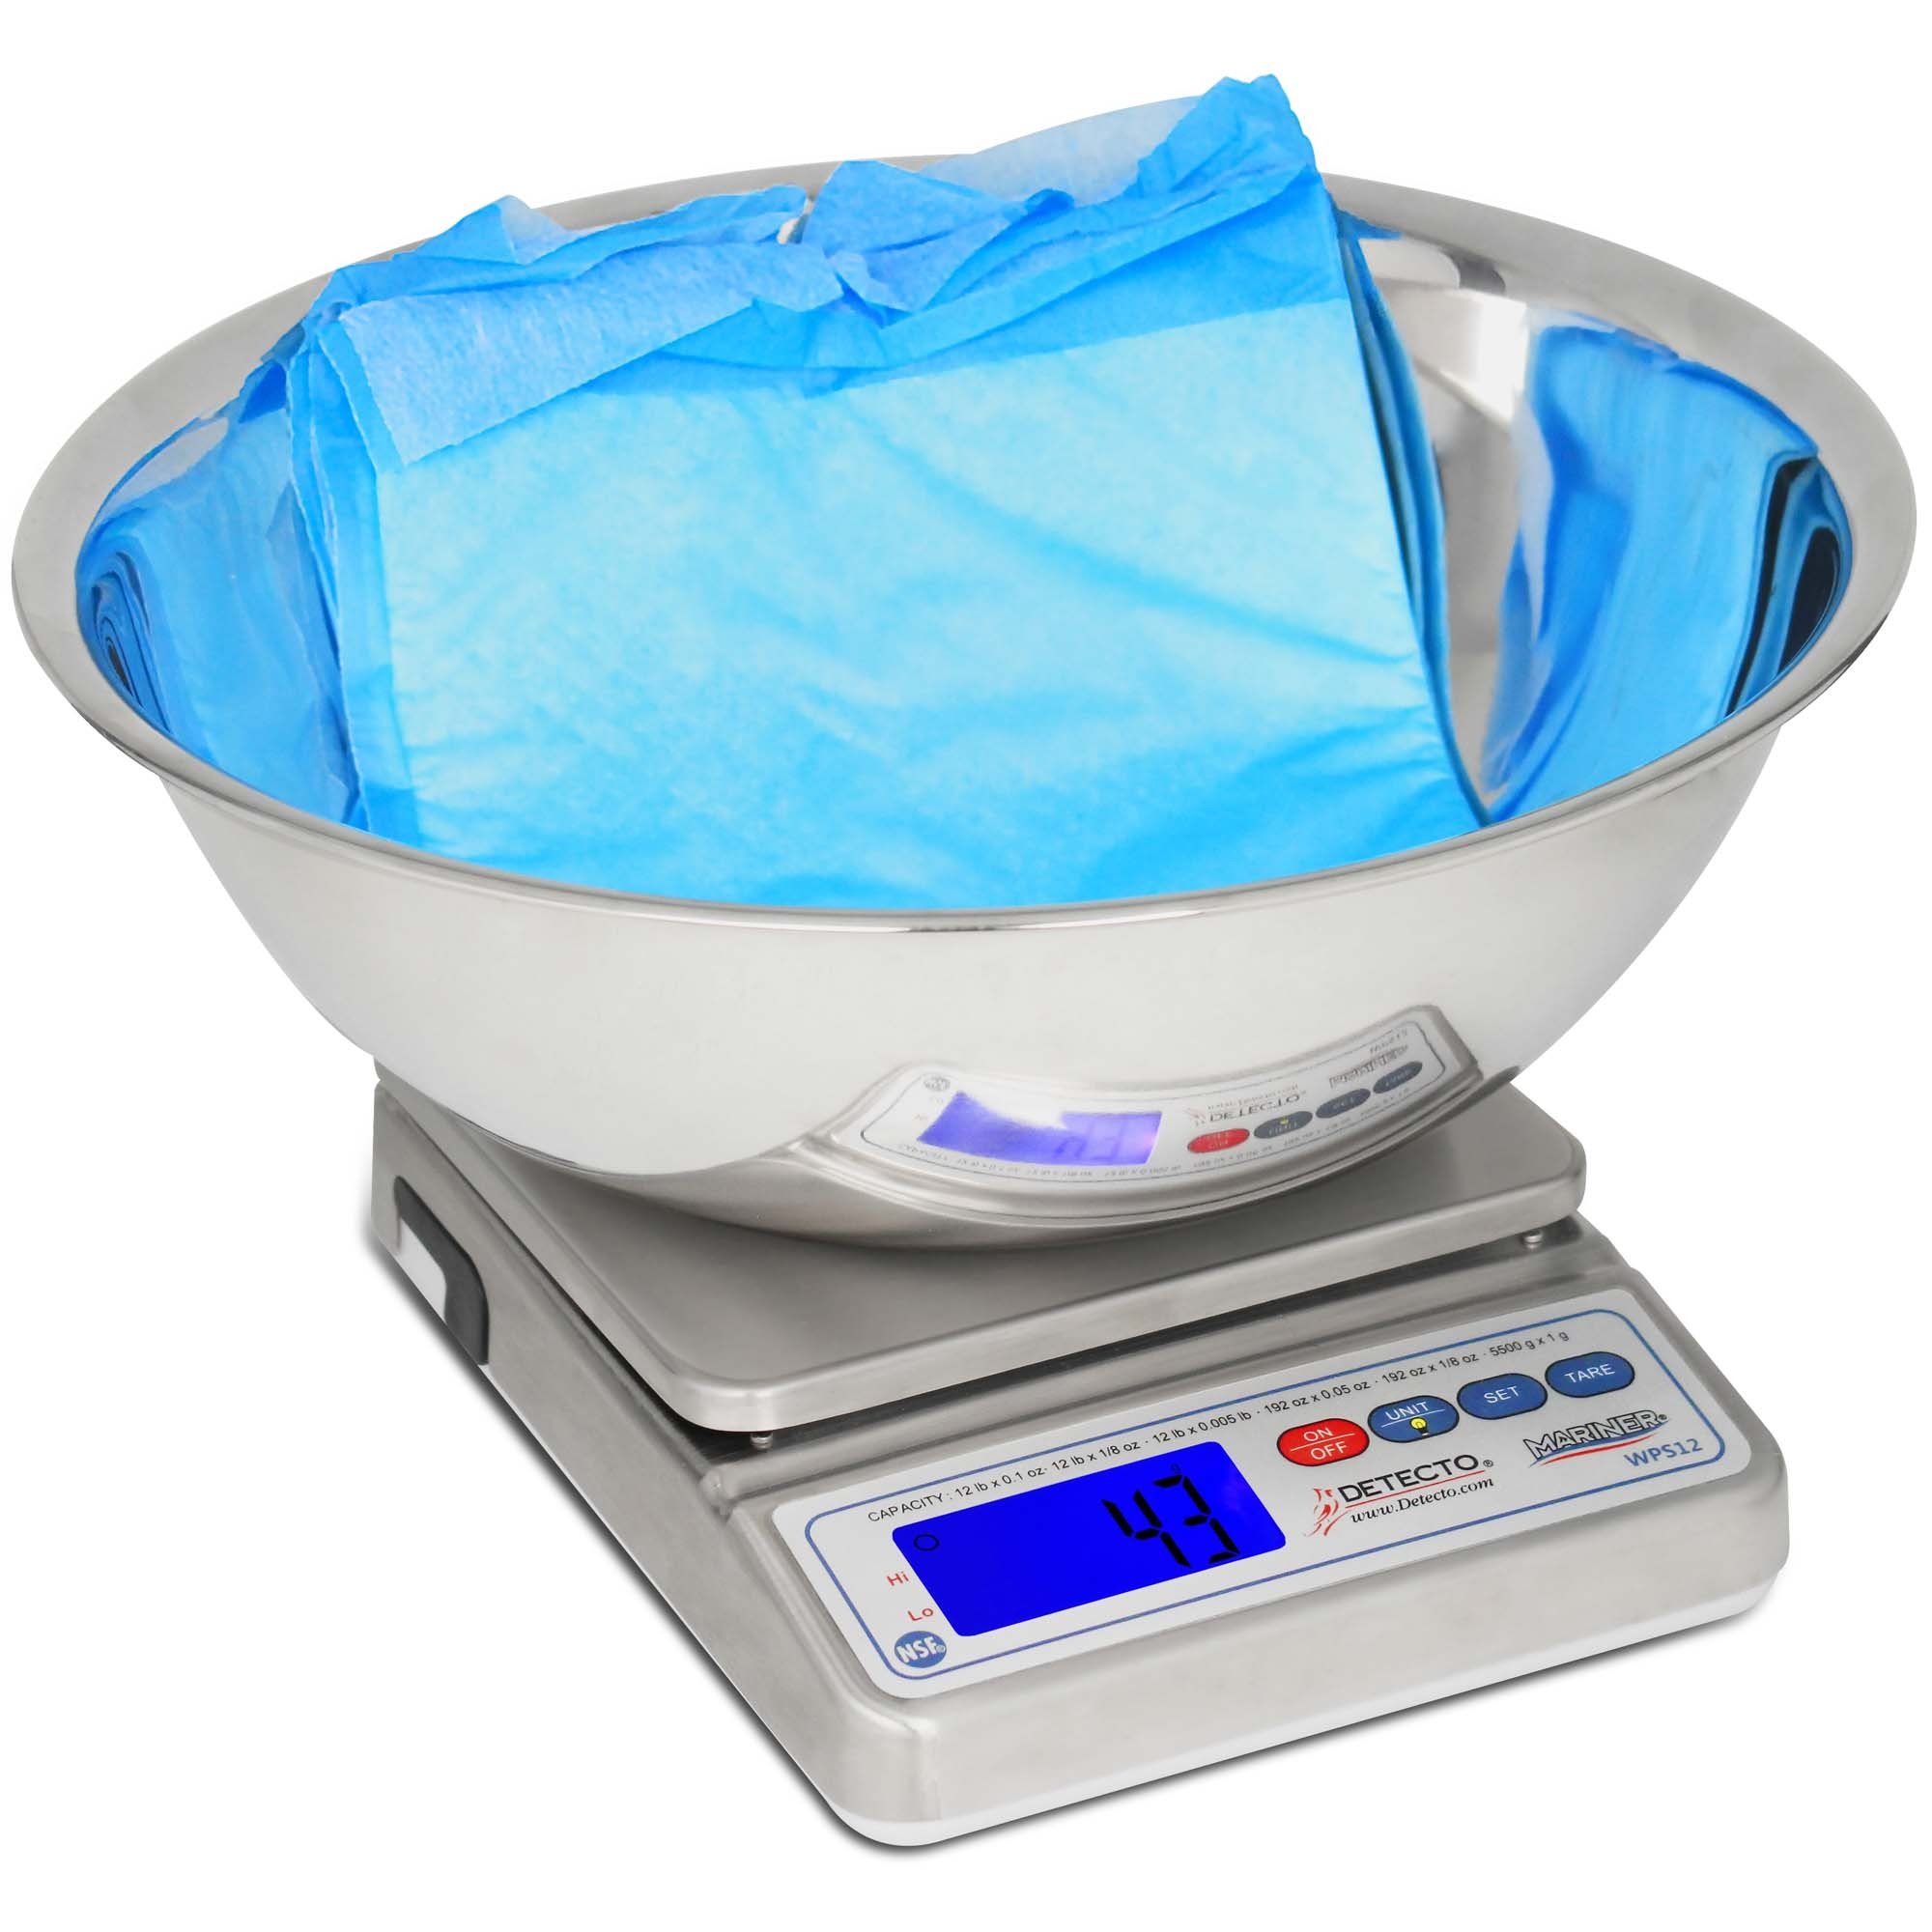 https://www.universalmedicalinc.com/media/catalog/product/cache/b4c565ddf1bc021465048acd78c313cc/w/p/wps12ut_digital-scale-with-utility-bowl-weighing-angle.jpg